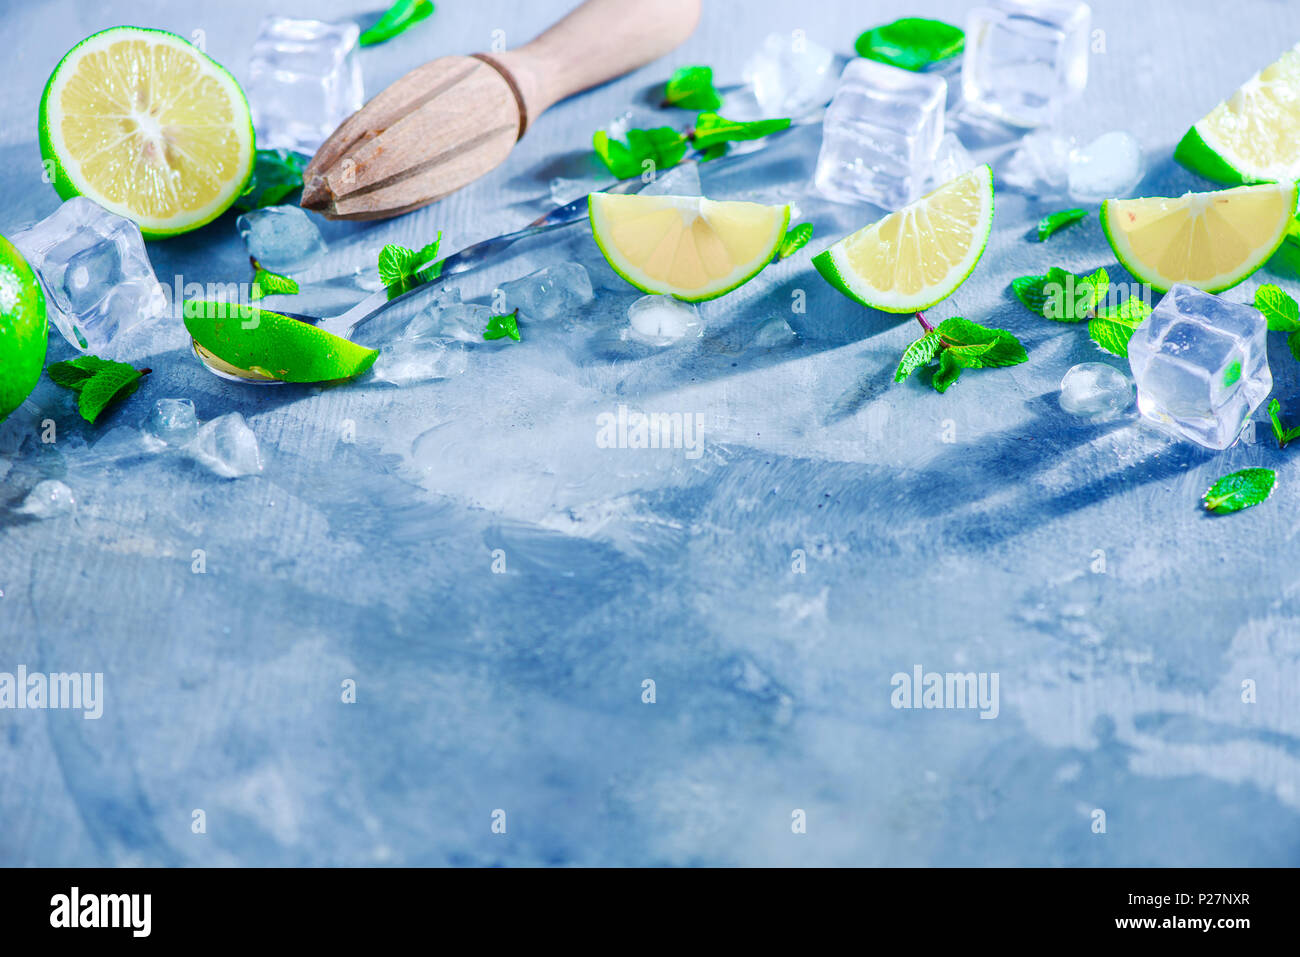 Summer drink header with mojito cocktail ingredients, mint, lime and ice cubes. Lemon reamer or juicer on a gray stone background with copy space. Stock Photo